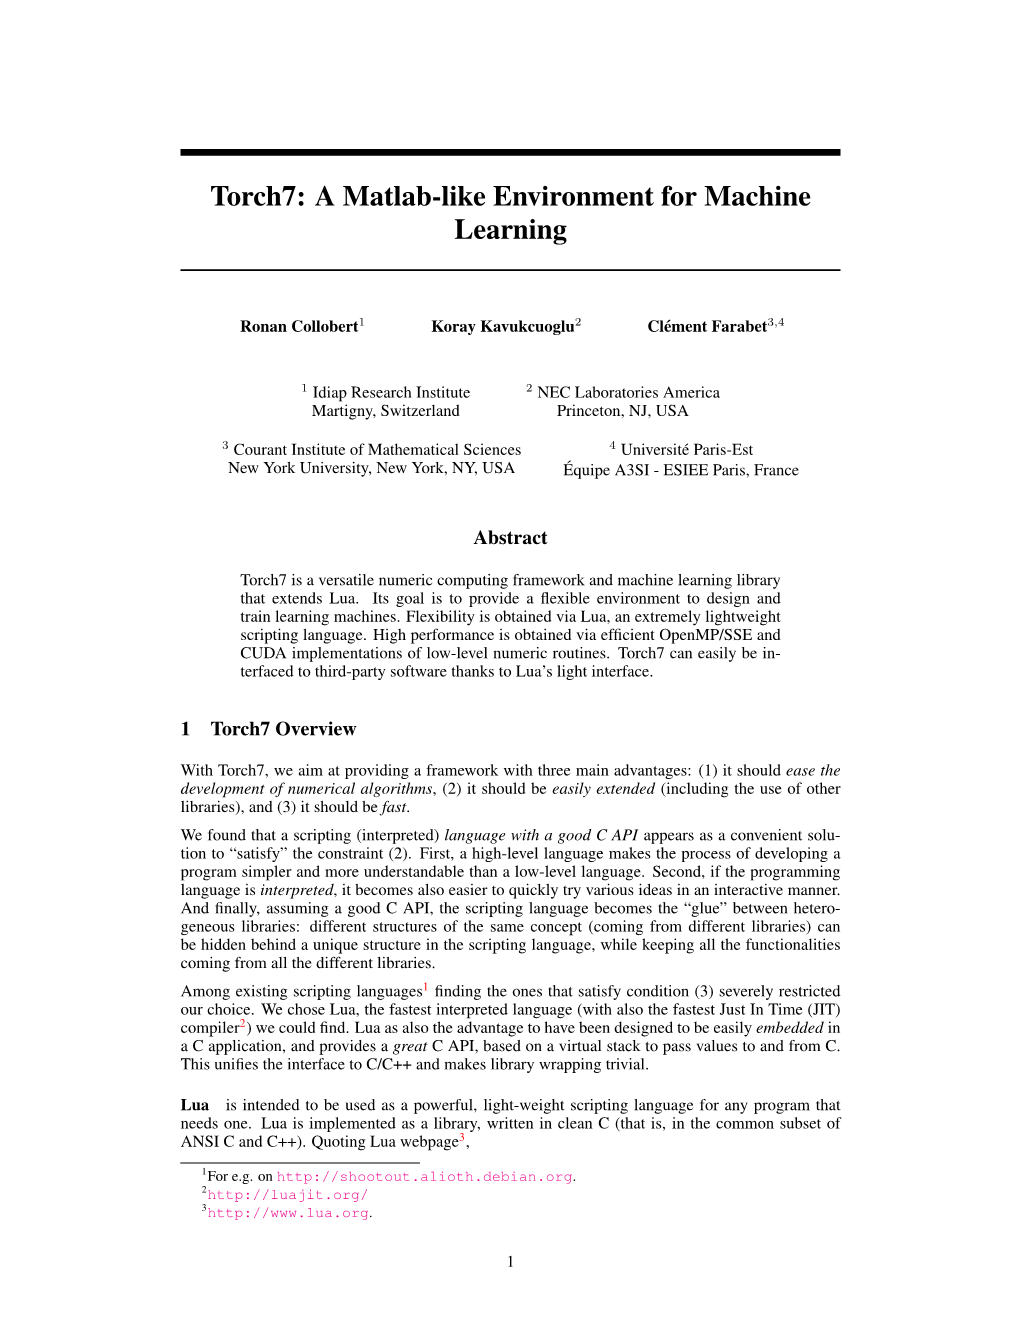 Torch7: a Matlab-Like Environment for Machine Learning